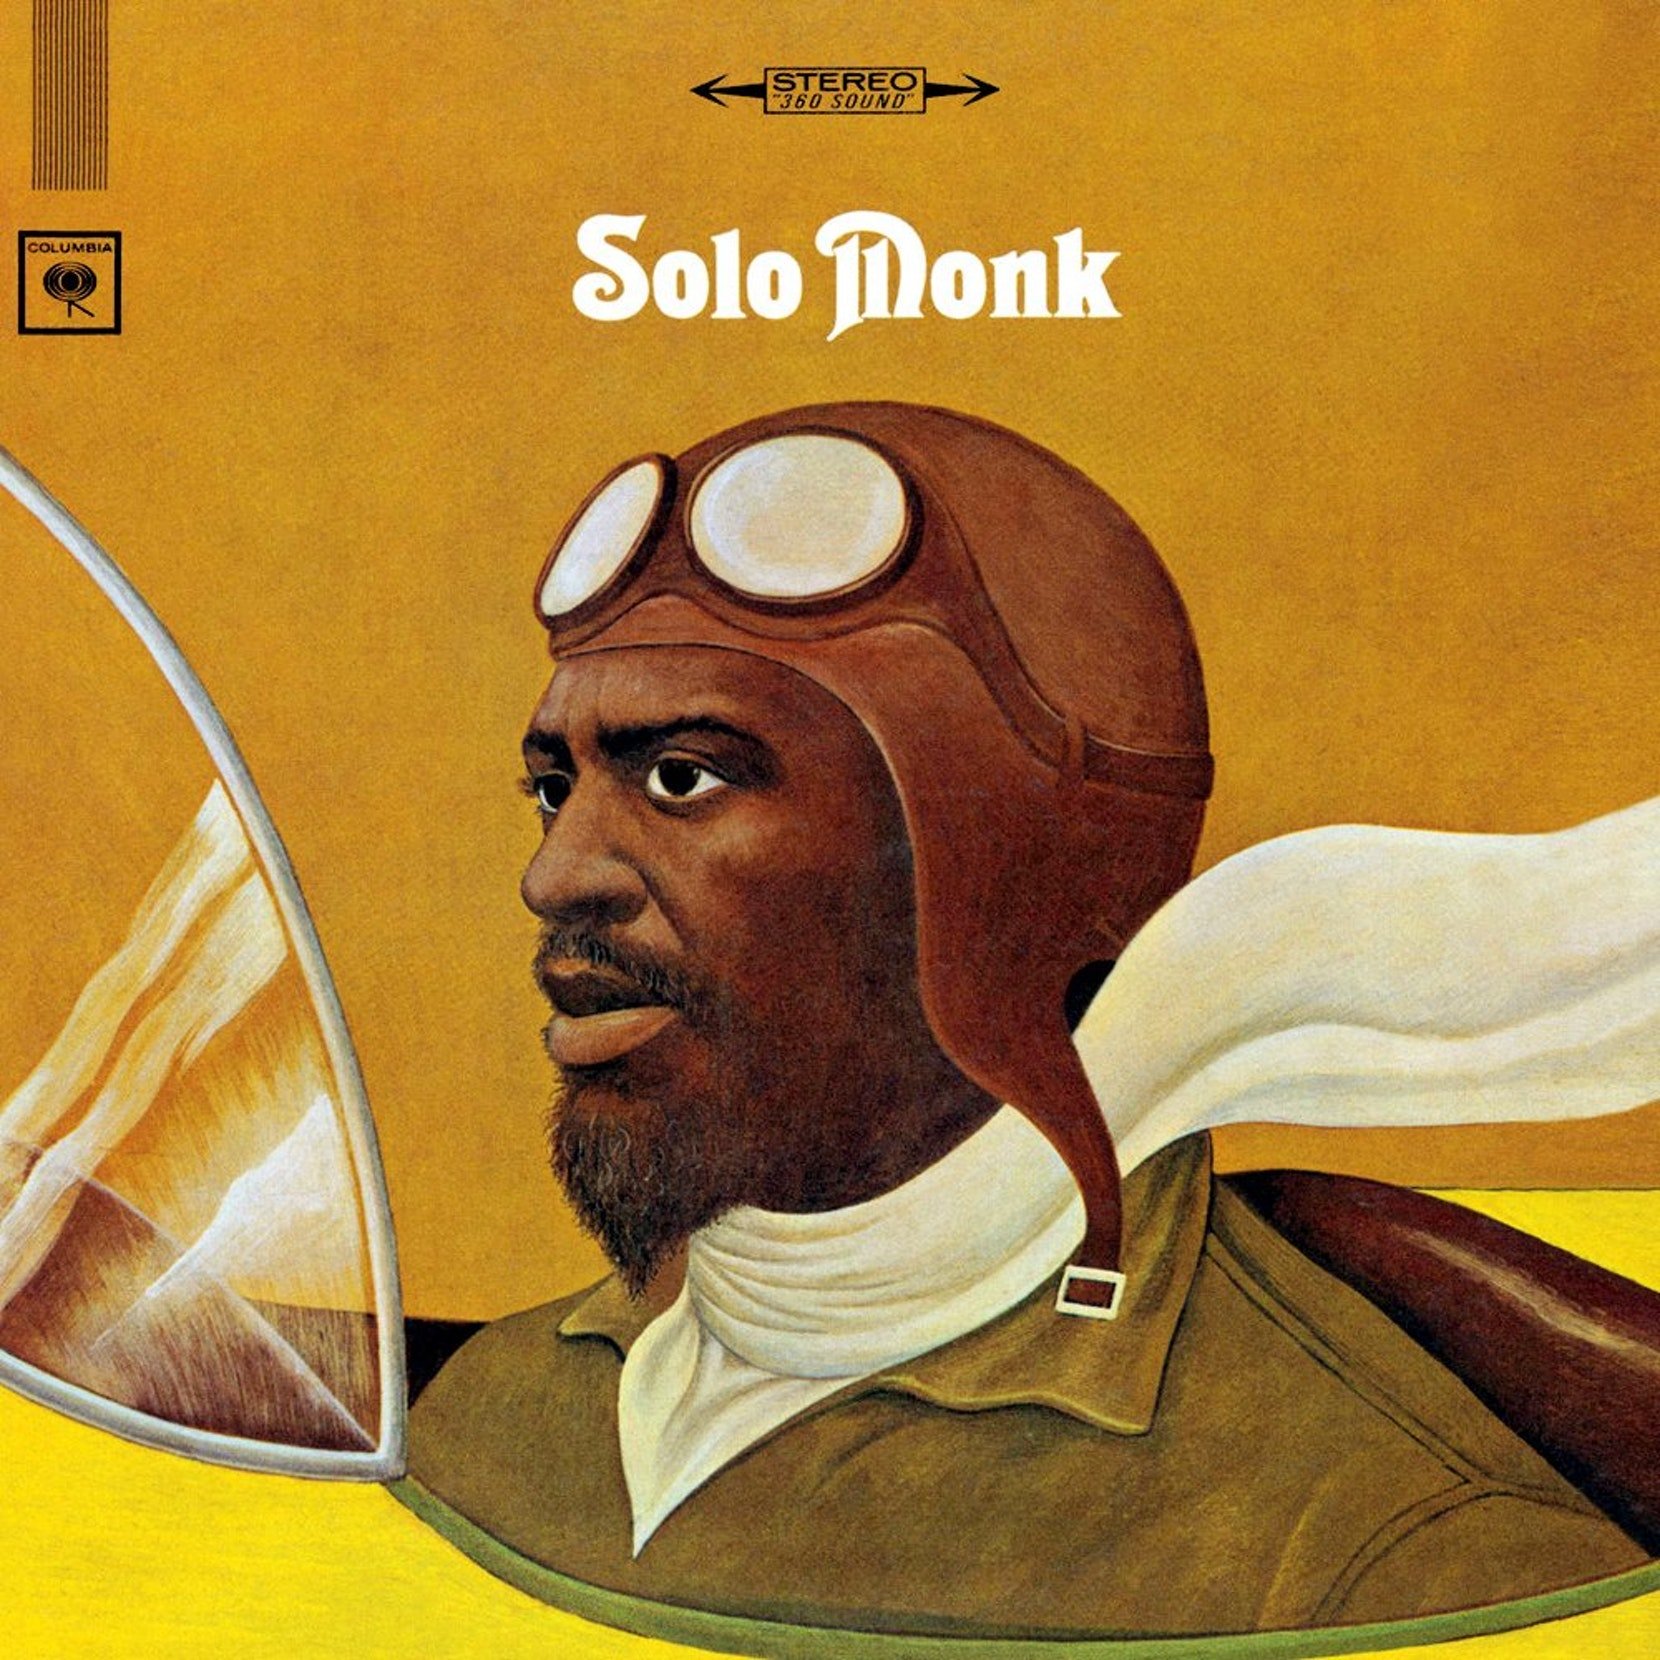 Thelonious Monk-Solo Monk-Remastered-CD-FLAC-1992-THEVOiD Download